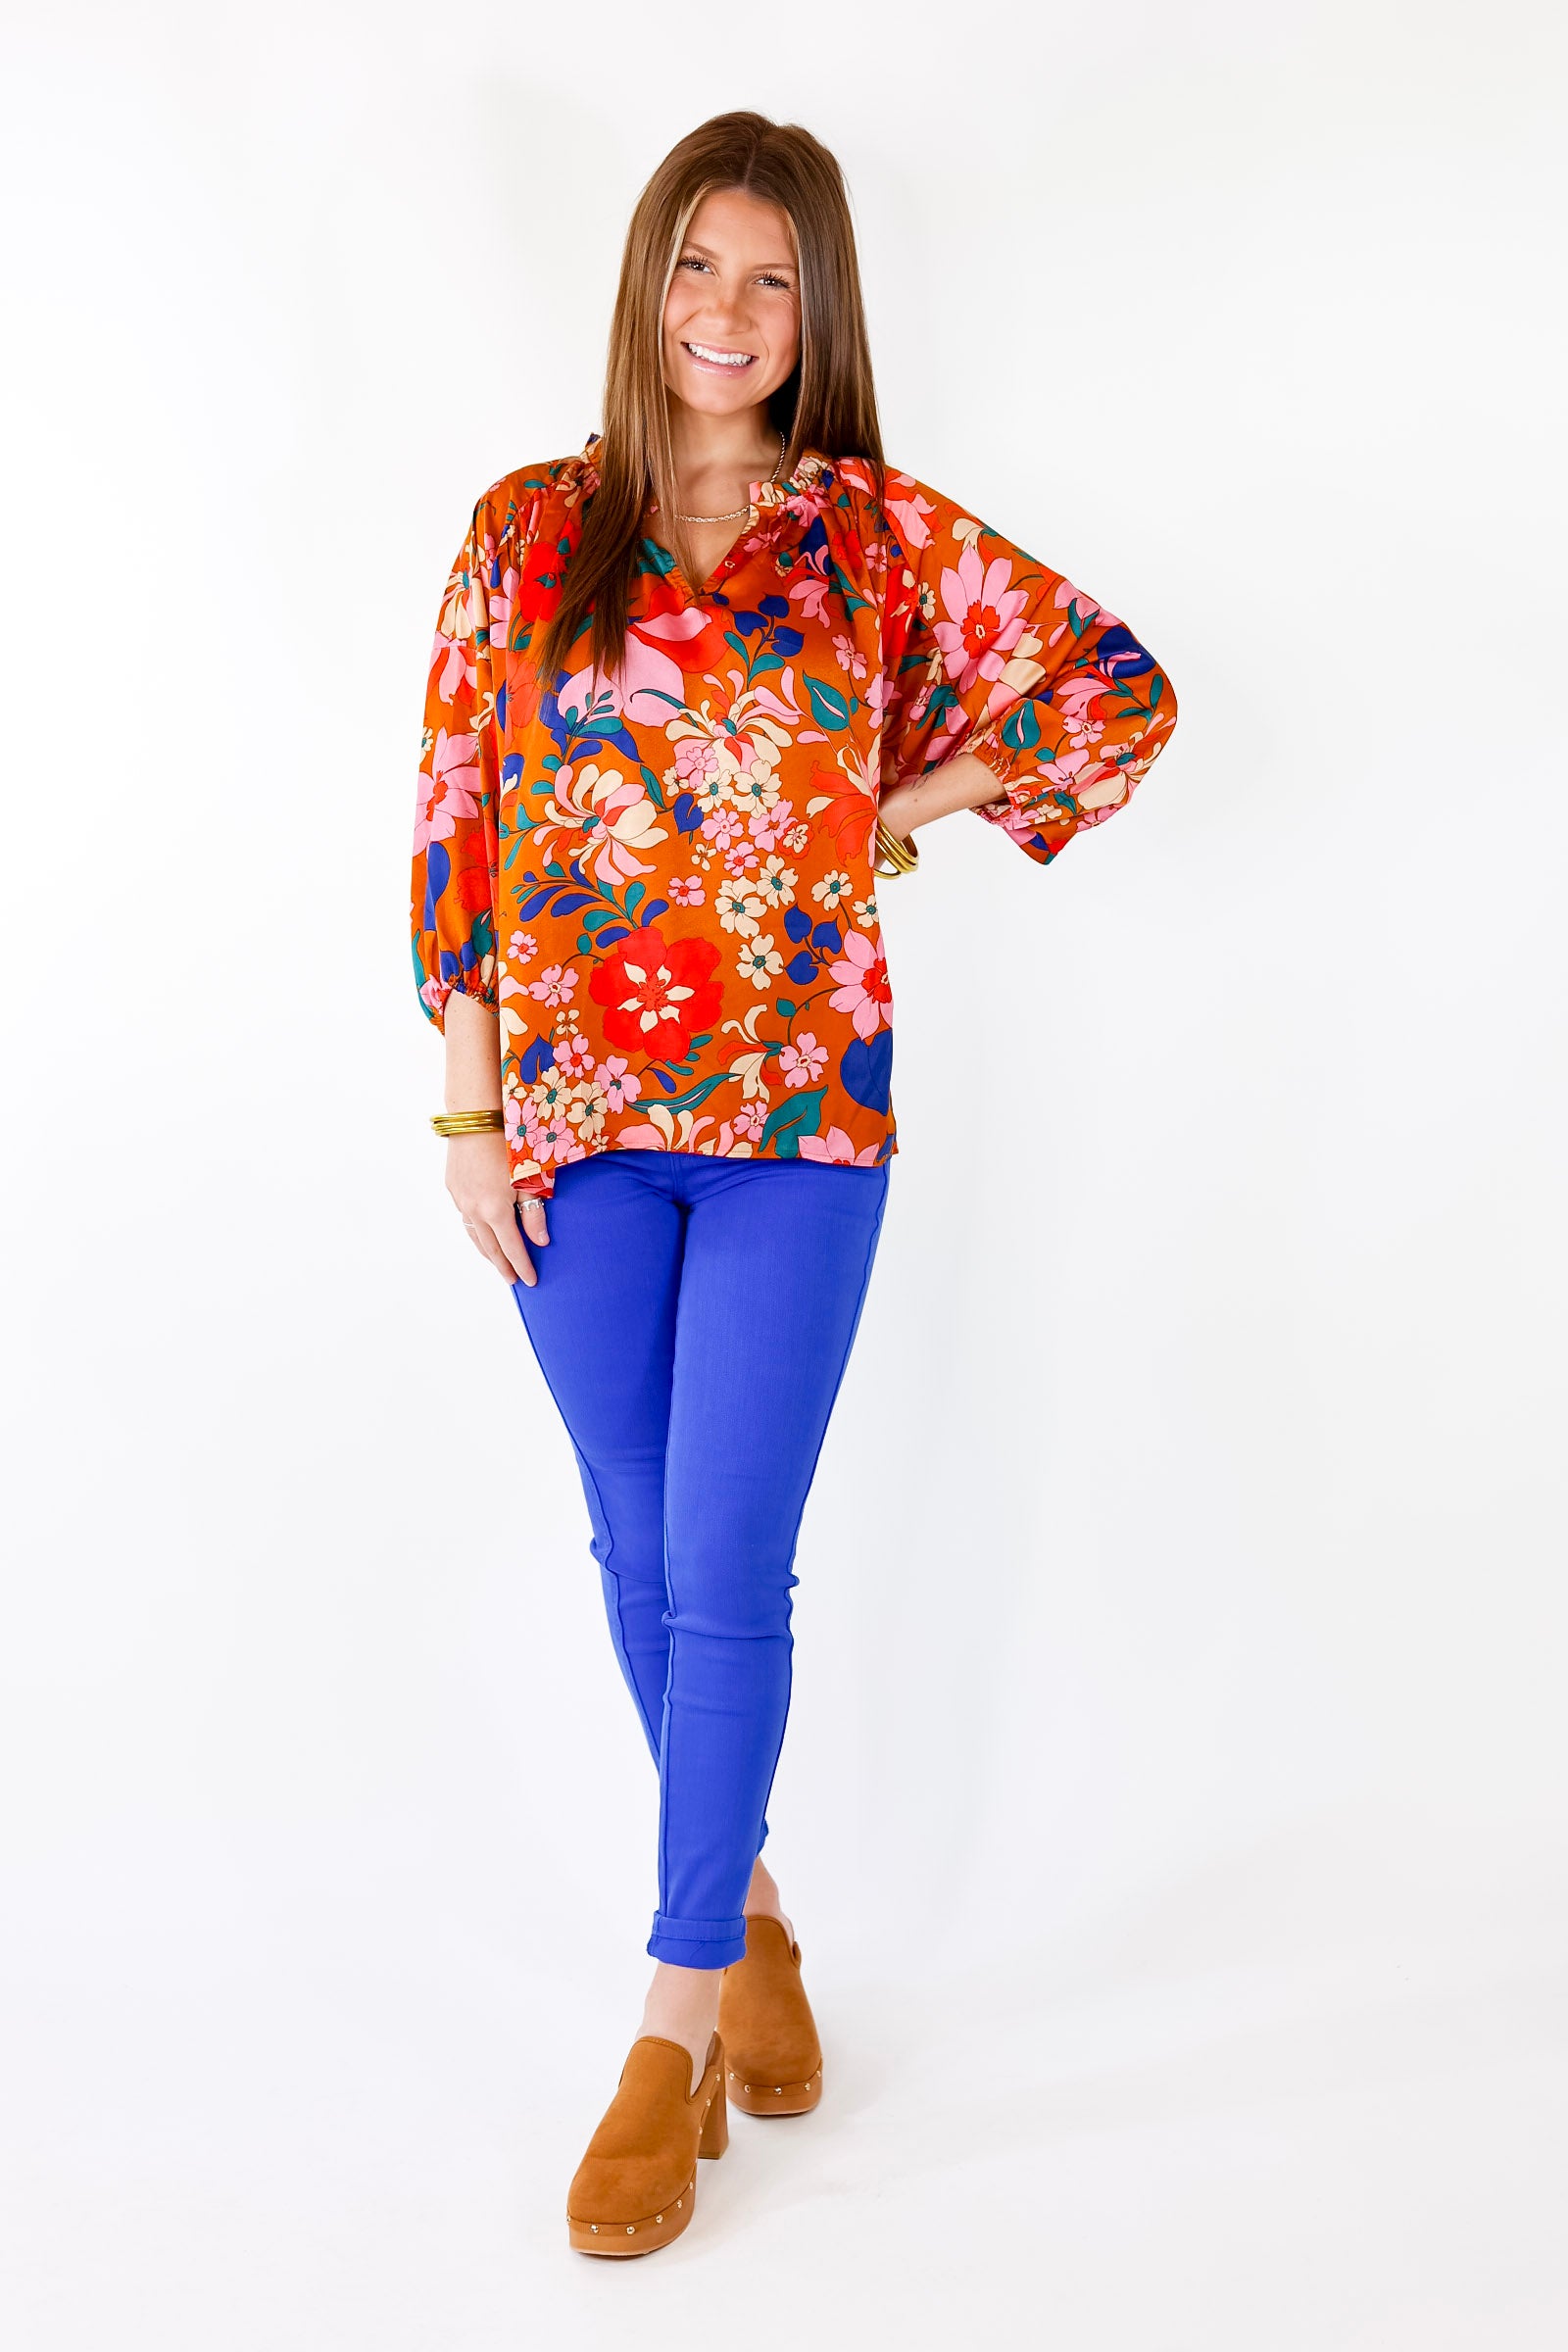 Falling For Floral 3/4 Sleeve Top with Notched Neck in Camel Brown - Giddy Up Glamour Boutique